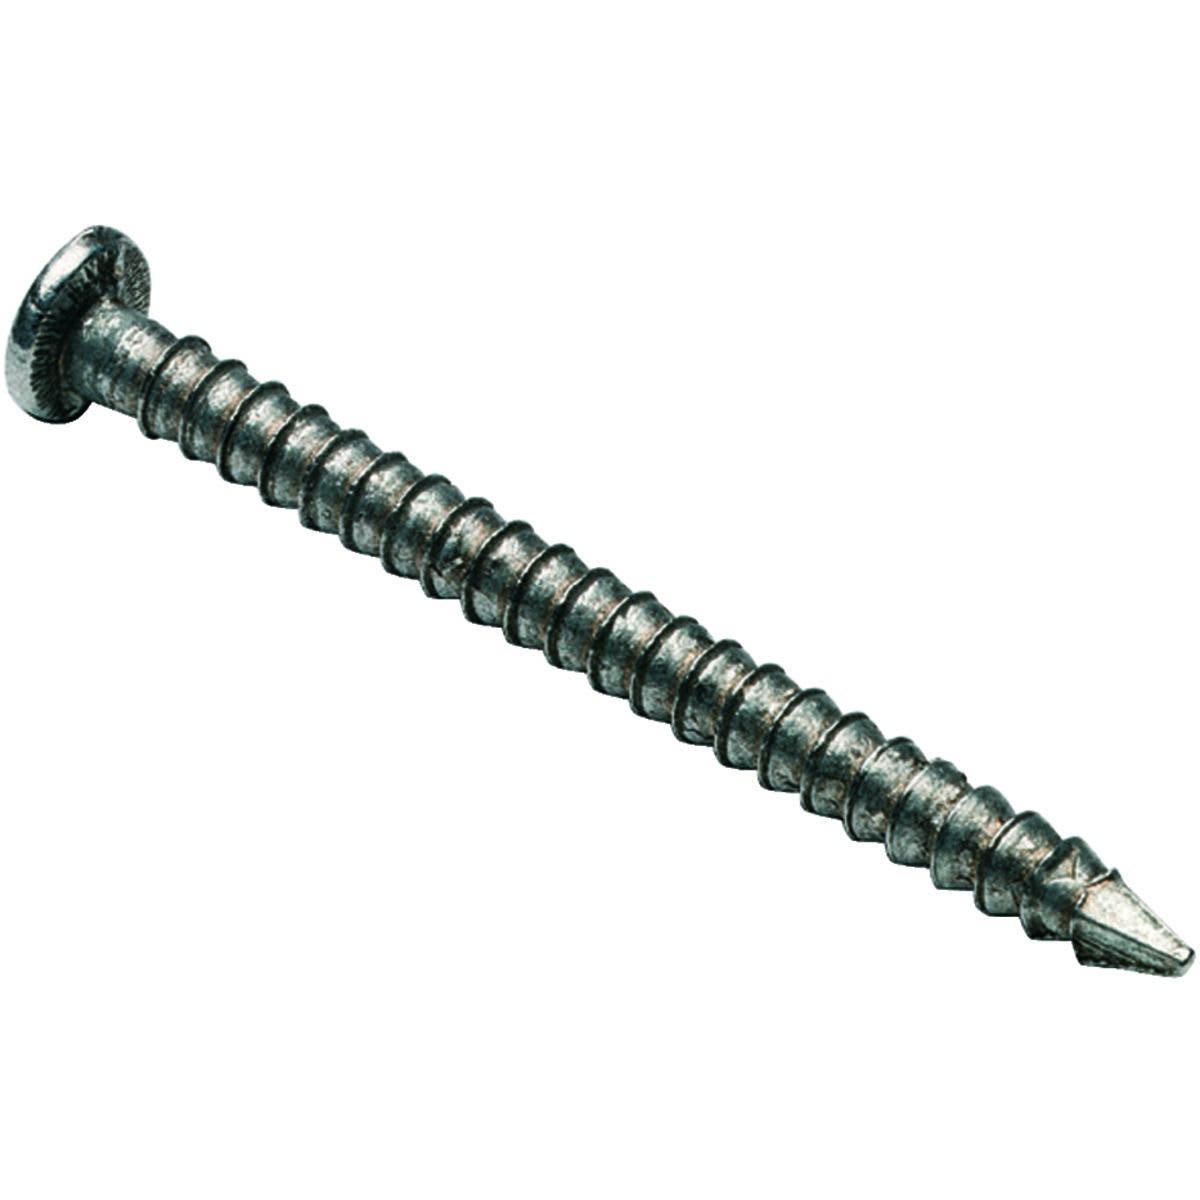 Wickes 65mm Bright Annular Extra Grip Nails -